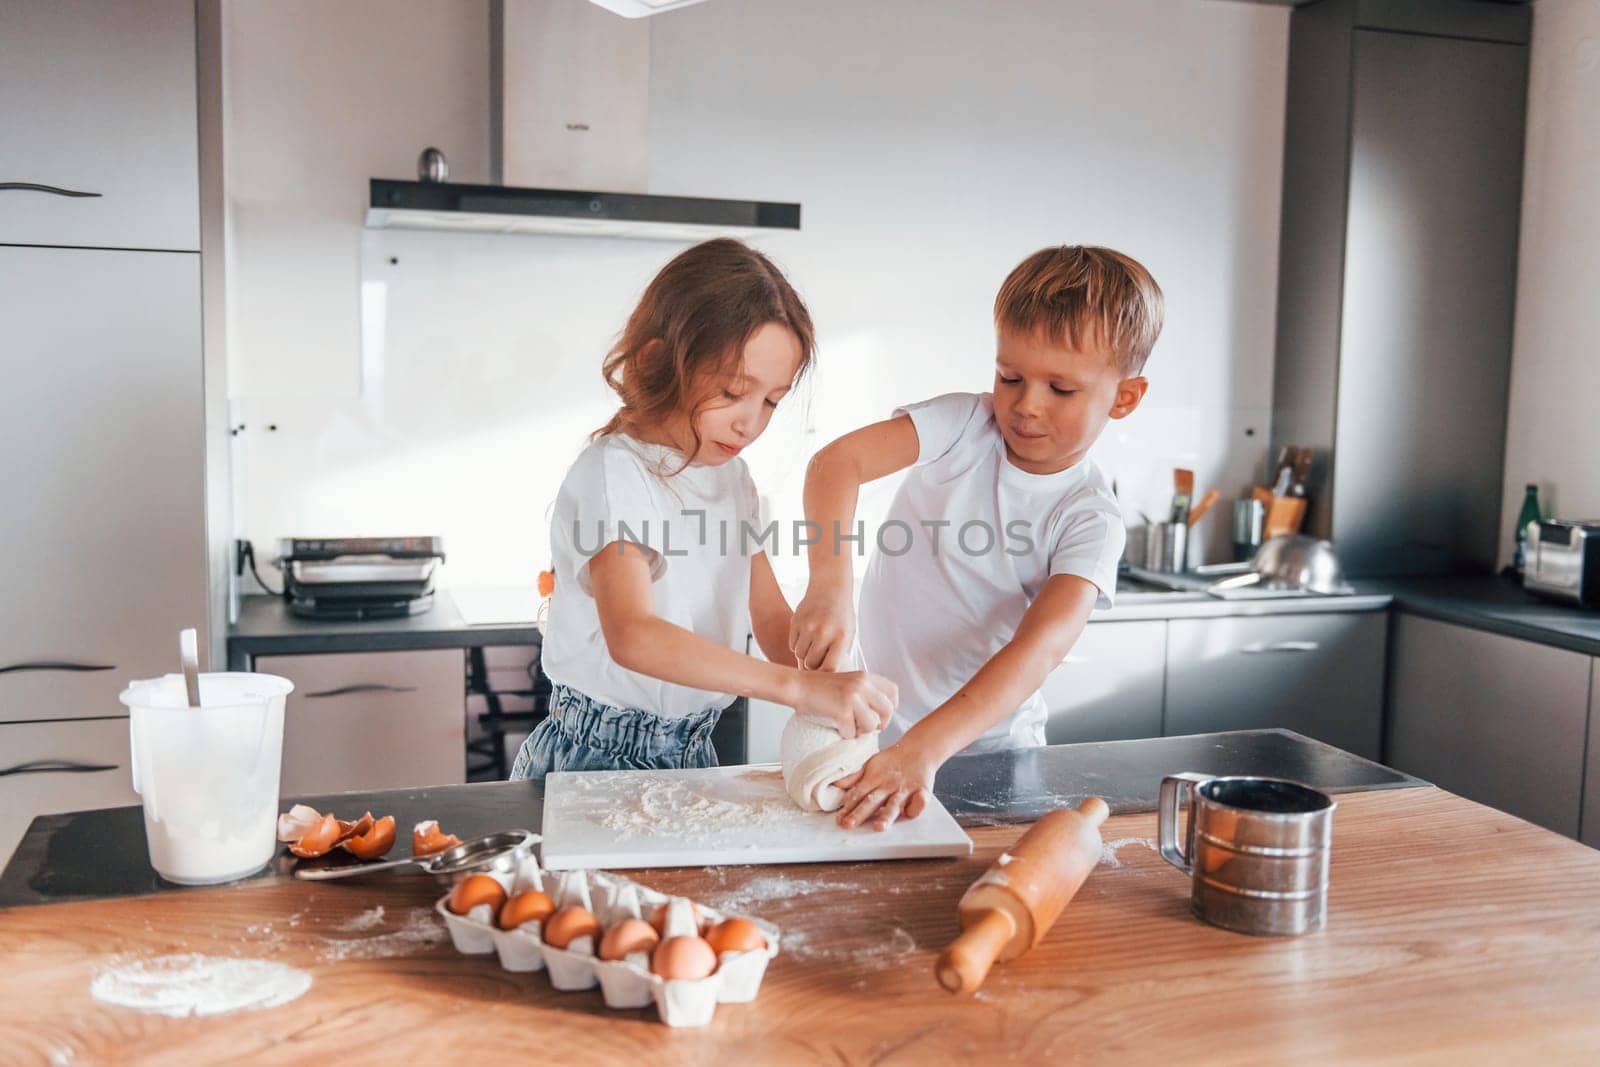 Cheerful emotions. Little boy and girl preparing Christmas cookies on the kitchen.